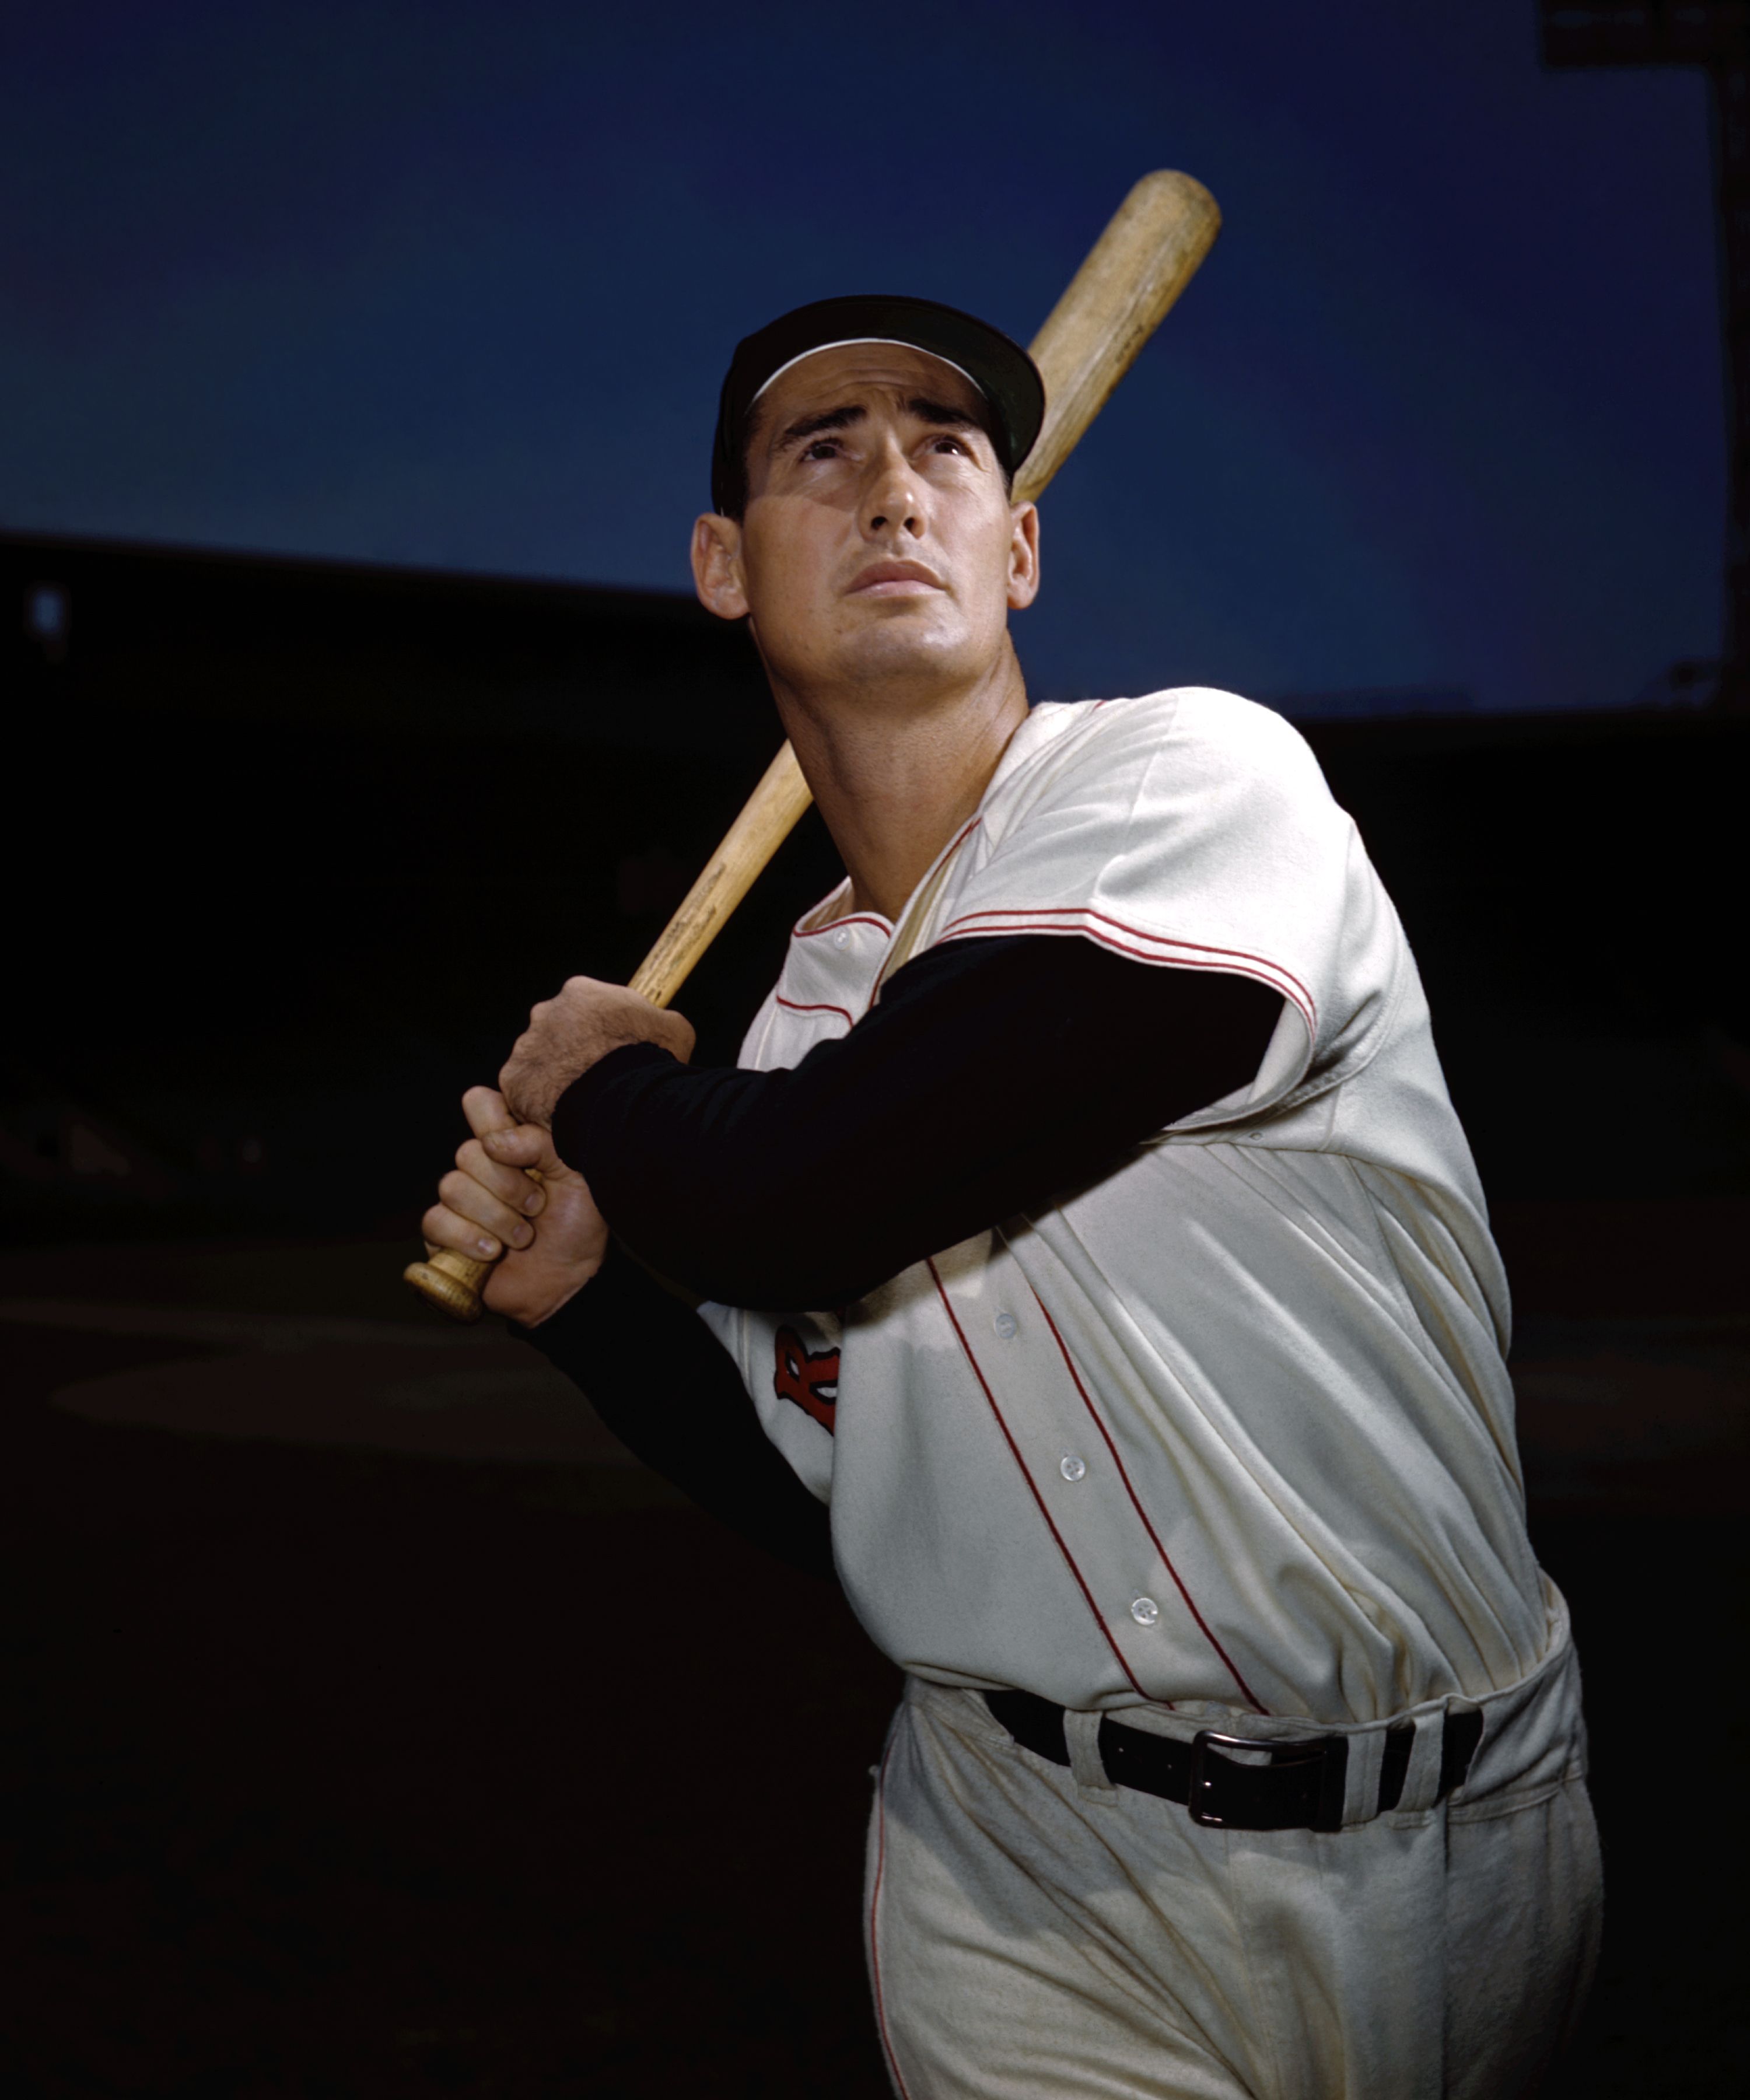 Ted Williams - Boston Red Sox (1957) - Photographic print for sale